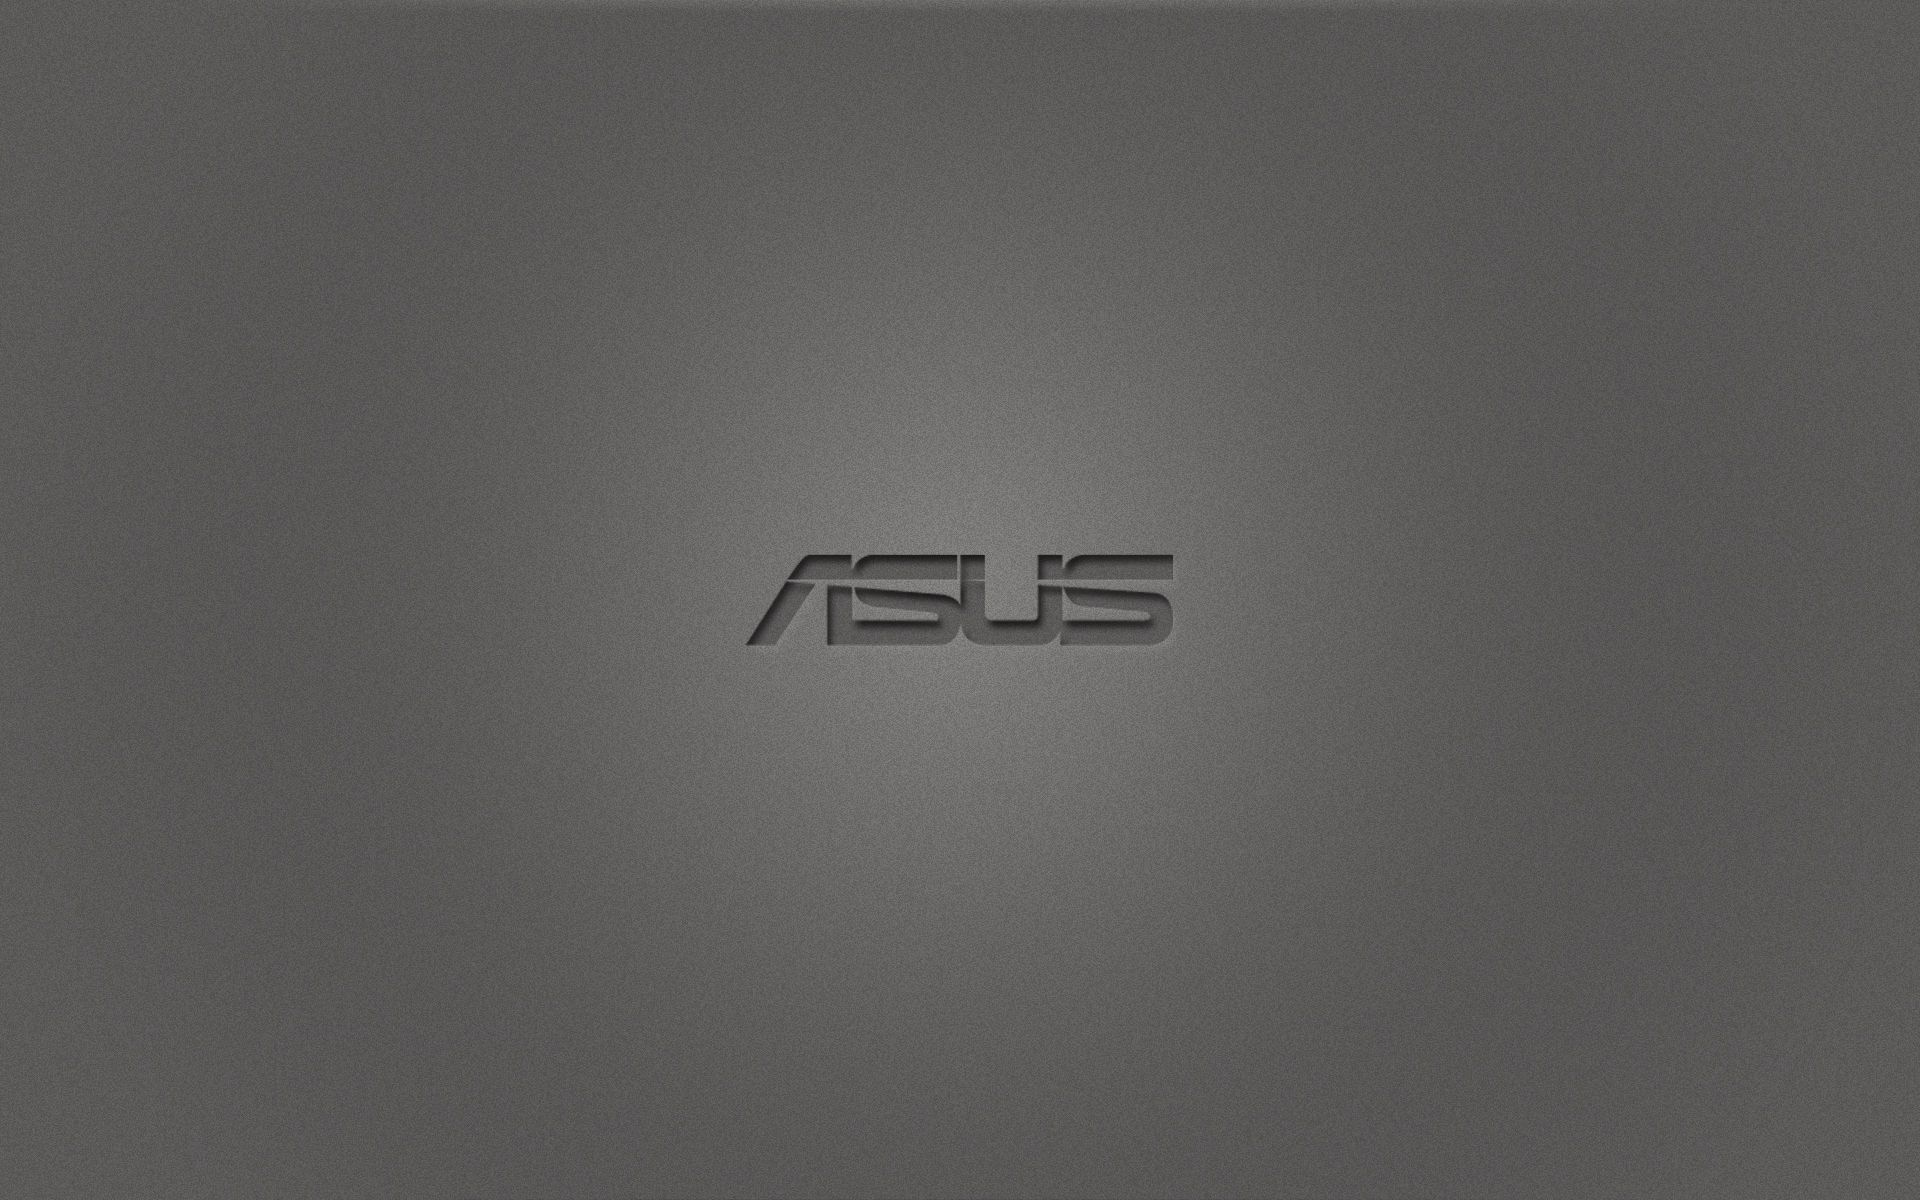 Asus Wallpapers Widescreen # 6TRY229 - 4USkY